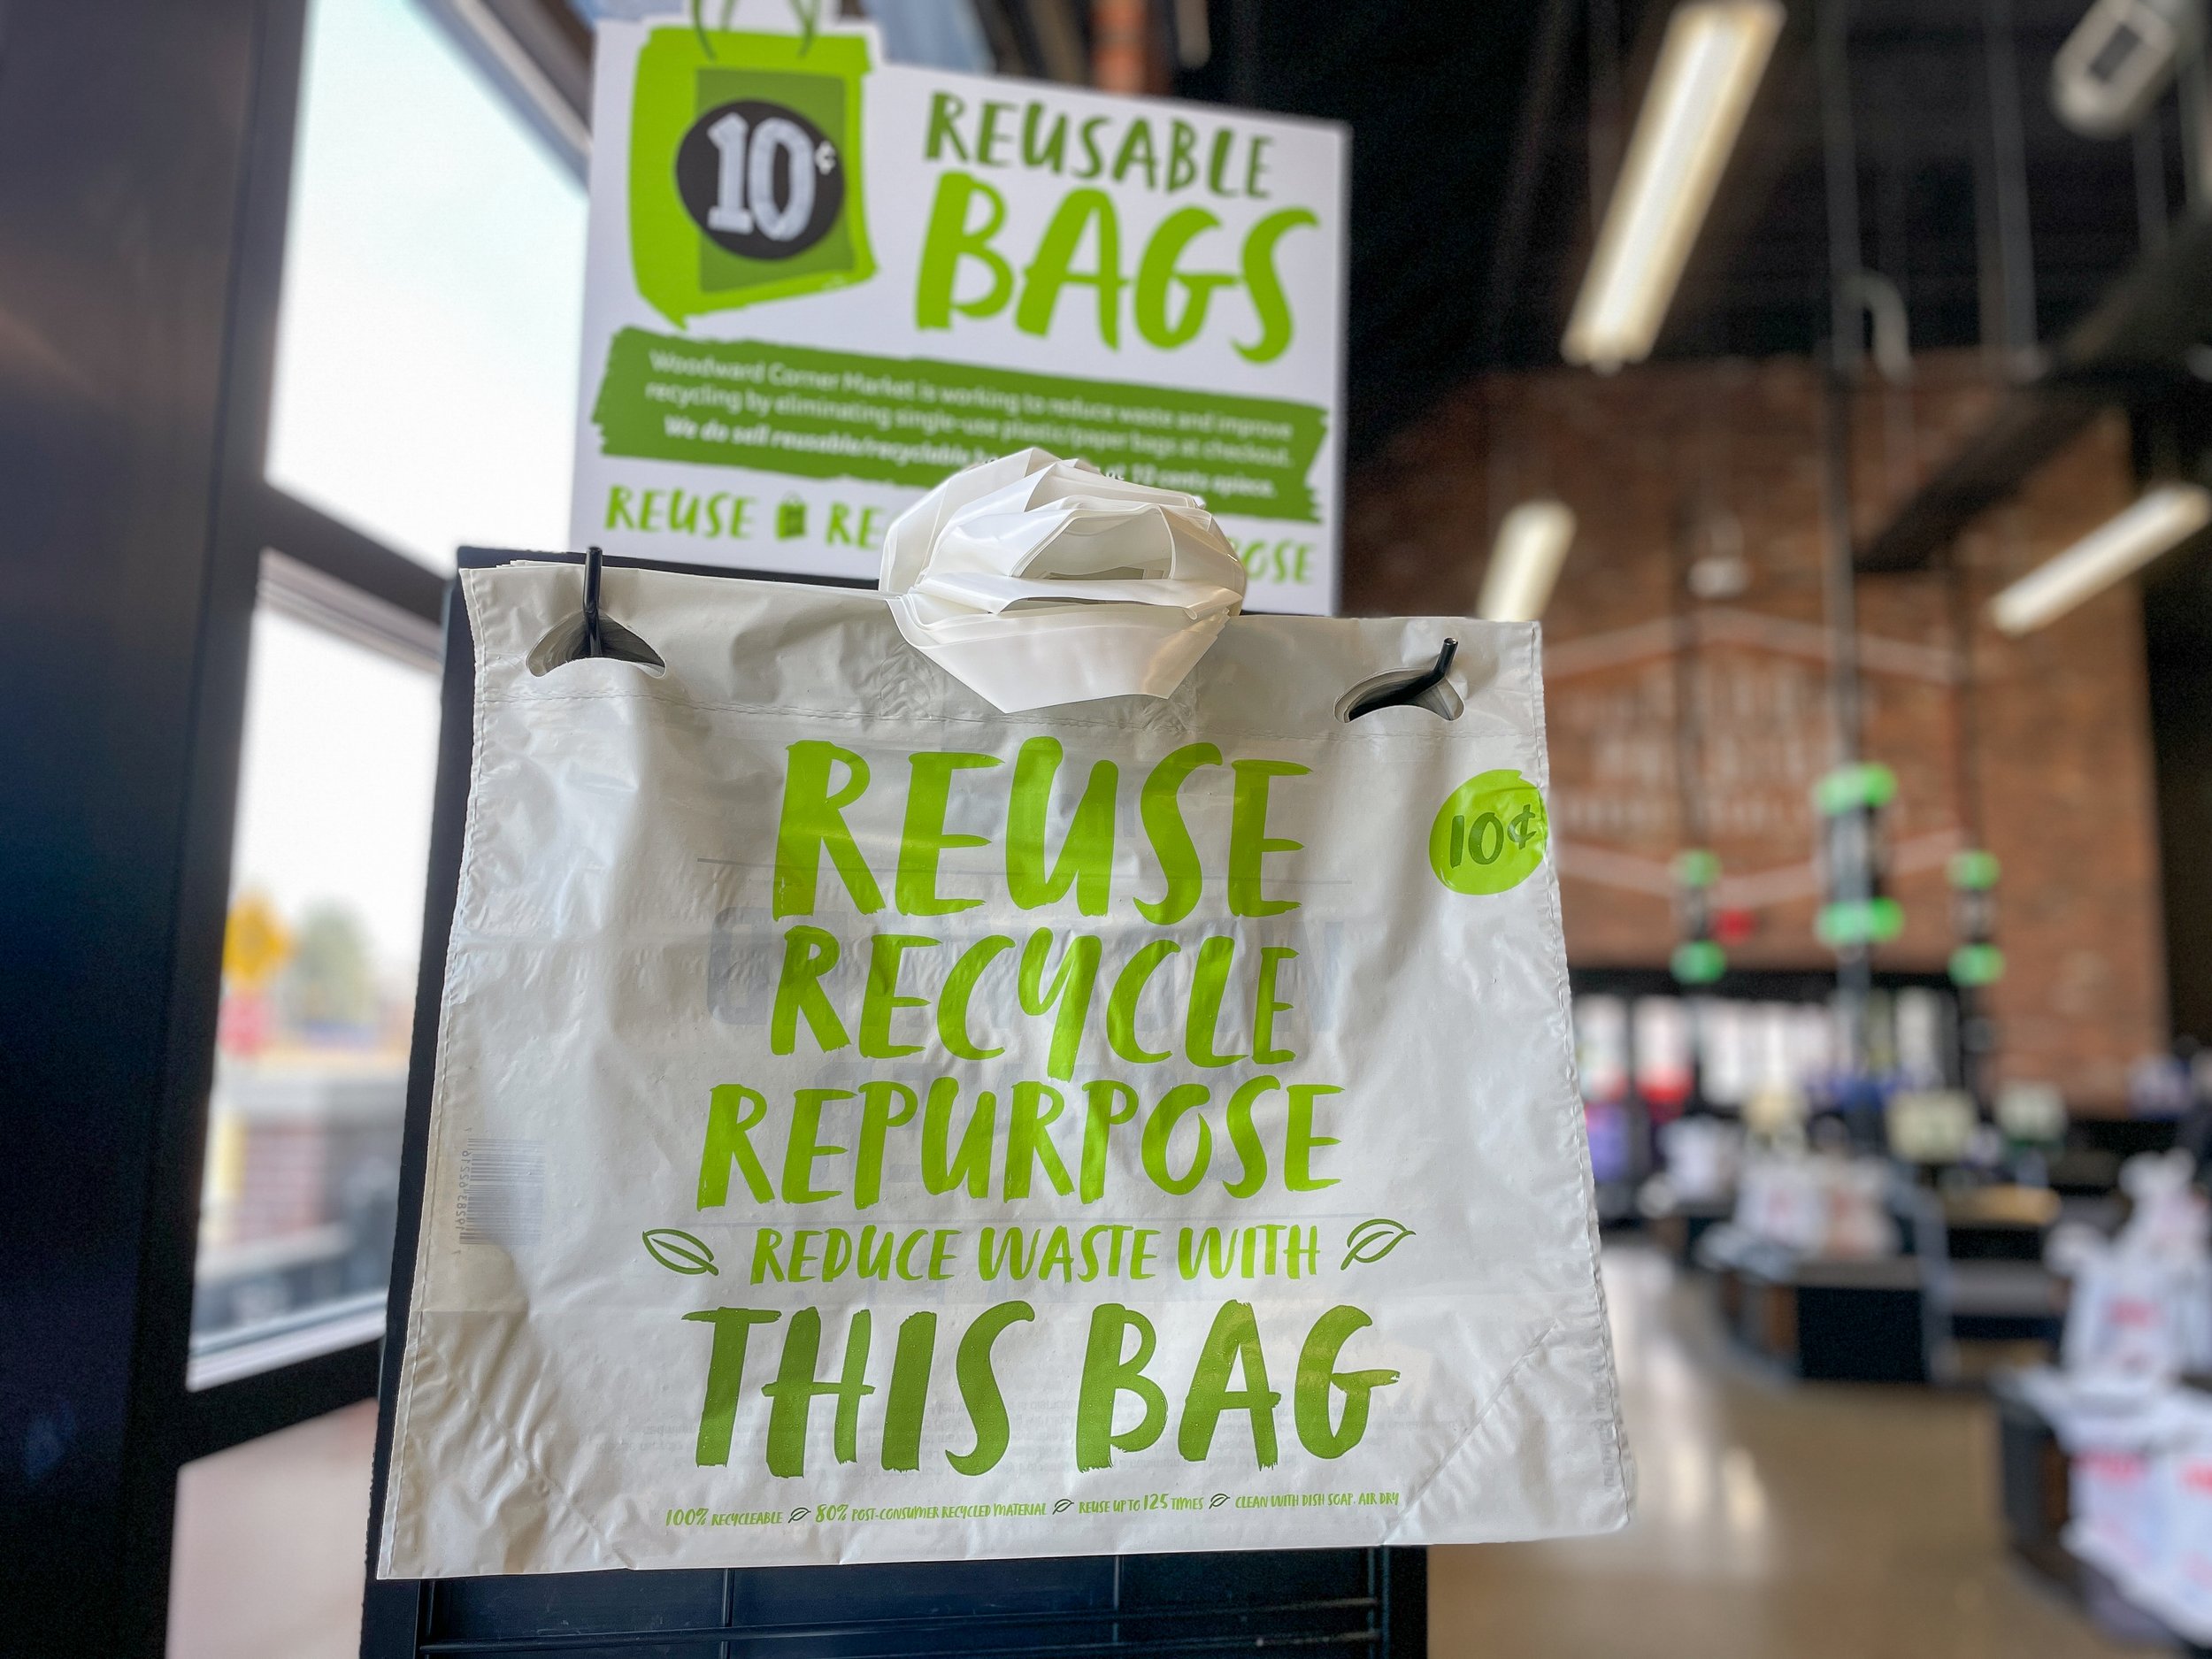 Plastic bags will be eliminated under updated recycling program